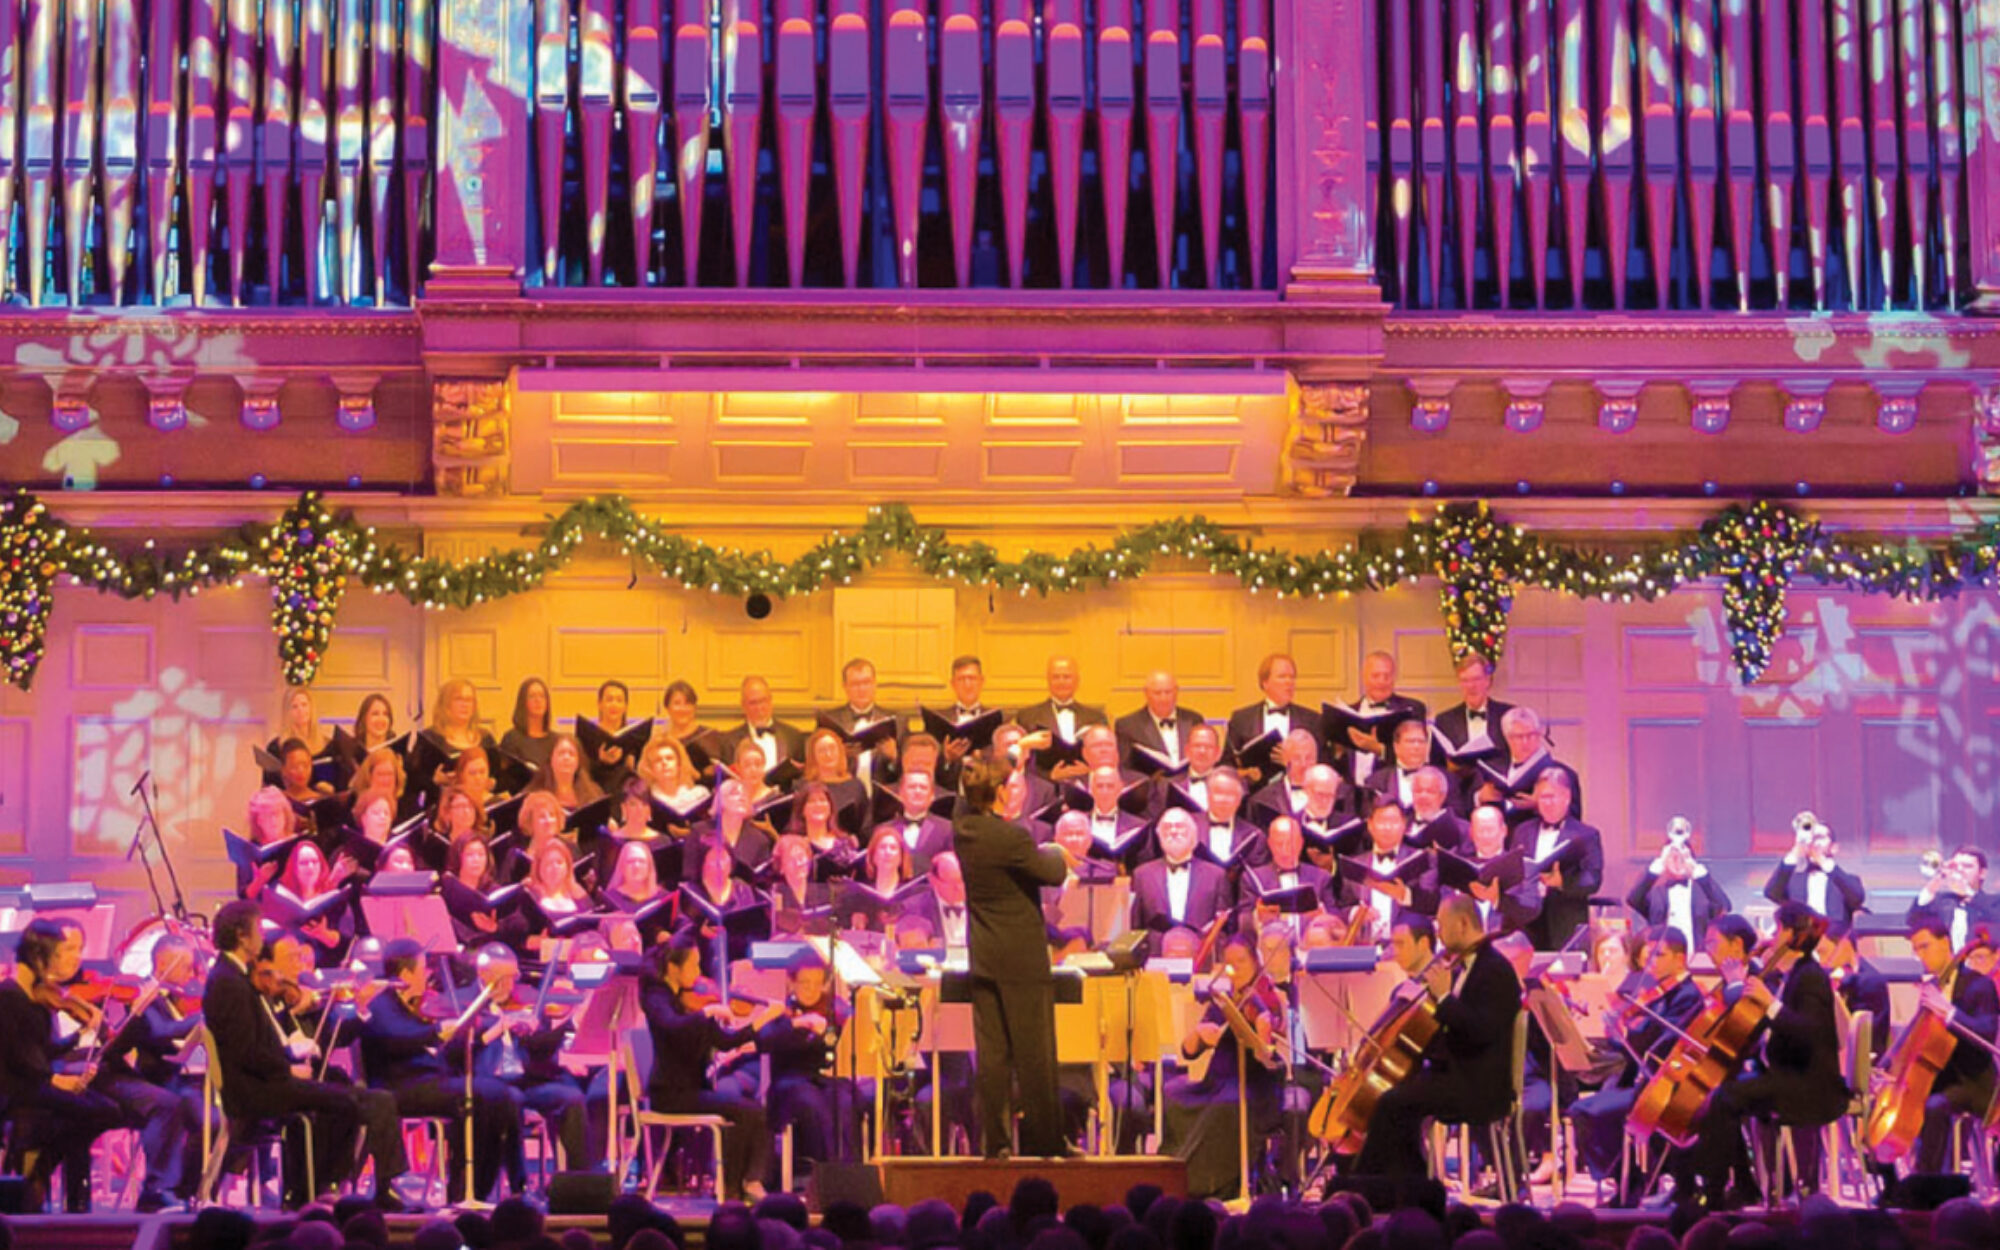 The Boston Pops and Tanglewood Festival Chorus perform on the Symphony Hall stage, which is lit with a bright purple light and projections of snowflakes